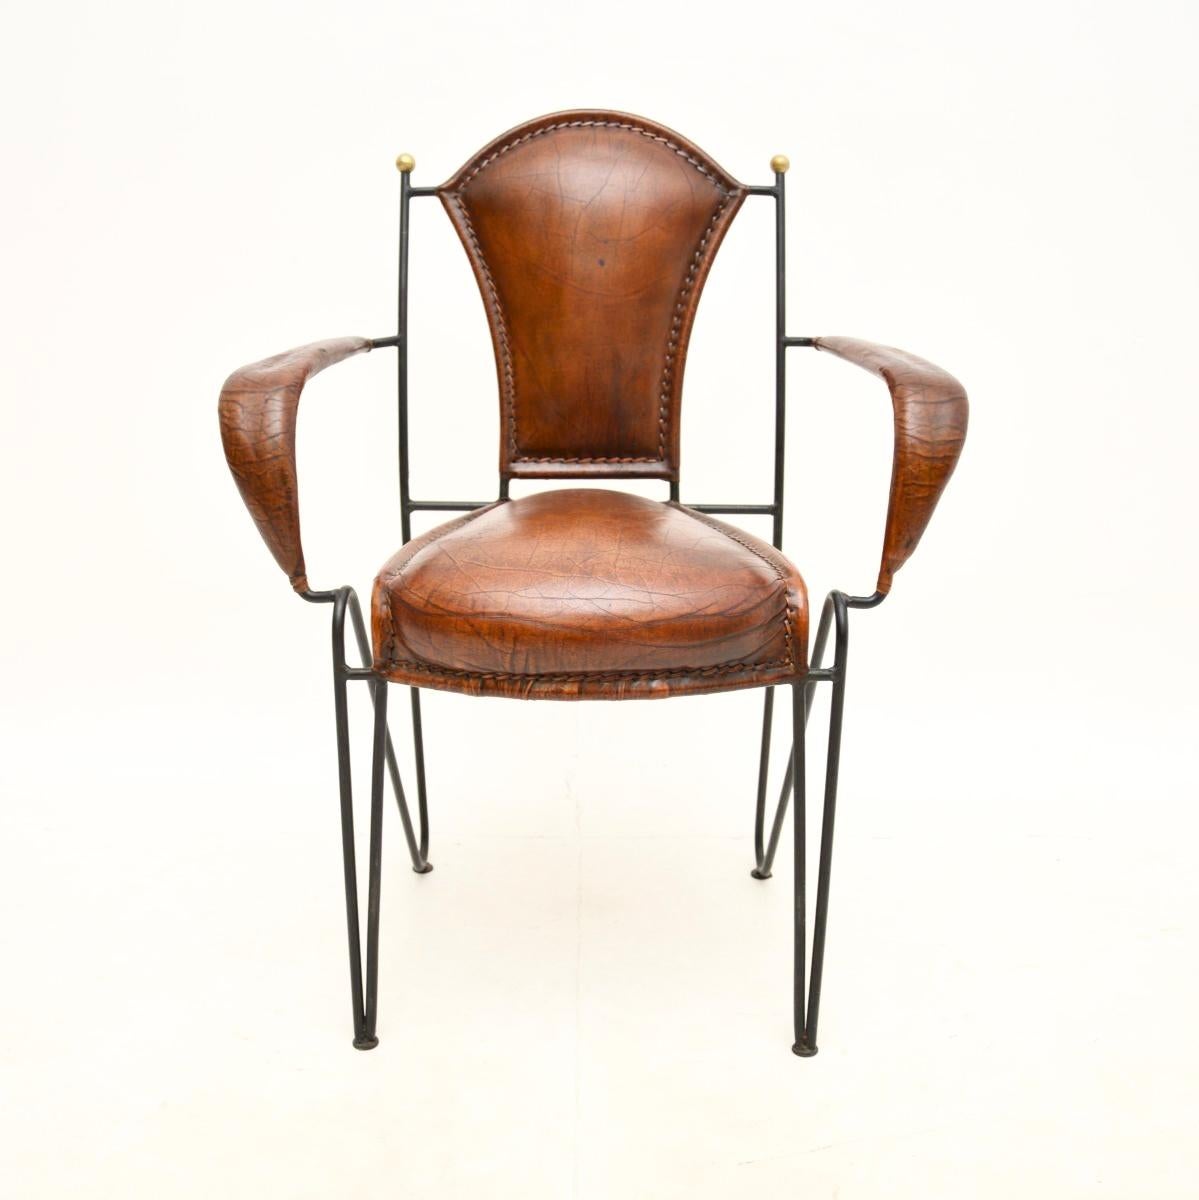 A stunning vintage French iron and leather armchair, dating from around the 1960’s. It is a great size for use as a desk chair or an occasional side chair.

This model is often attributed to Jacques Adnet, it is of superb quality and is extremely